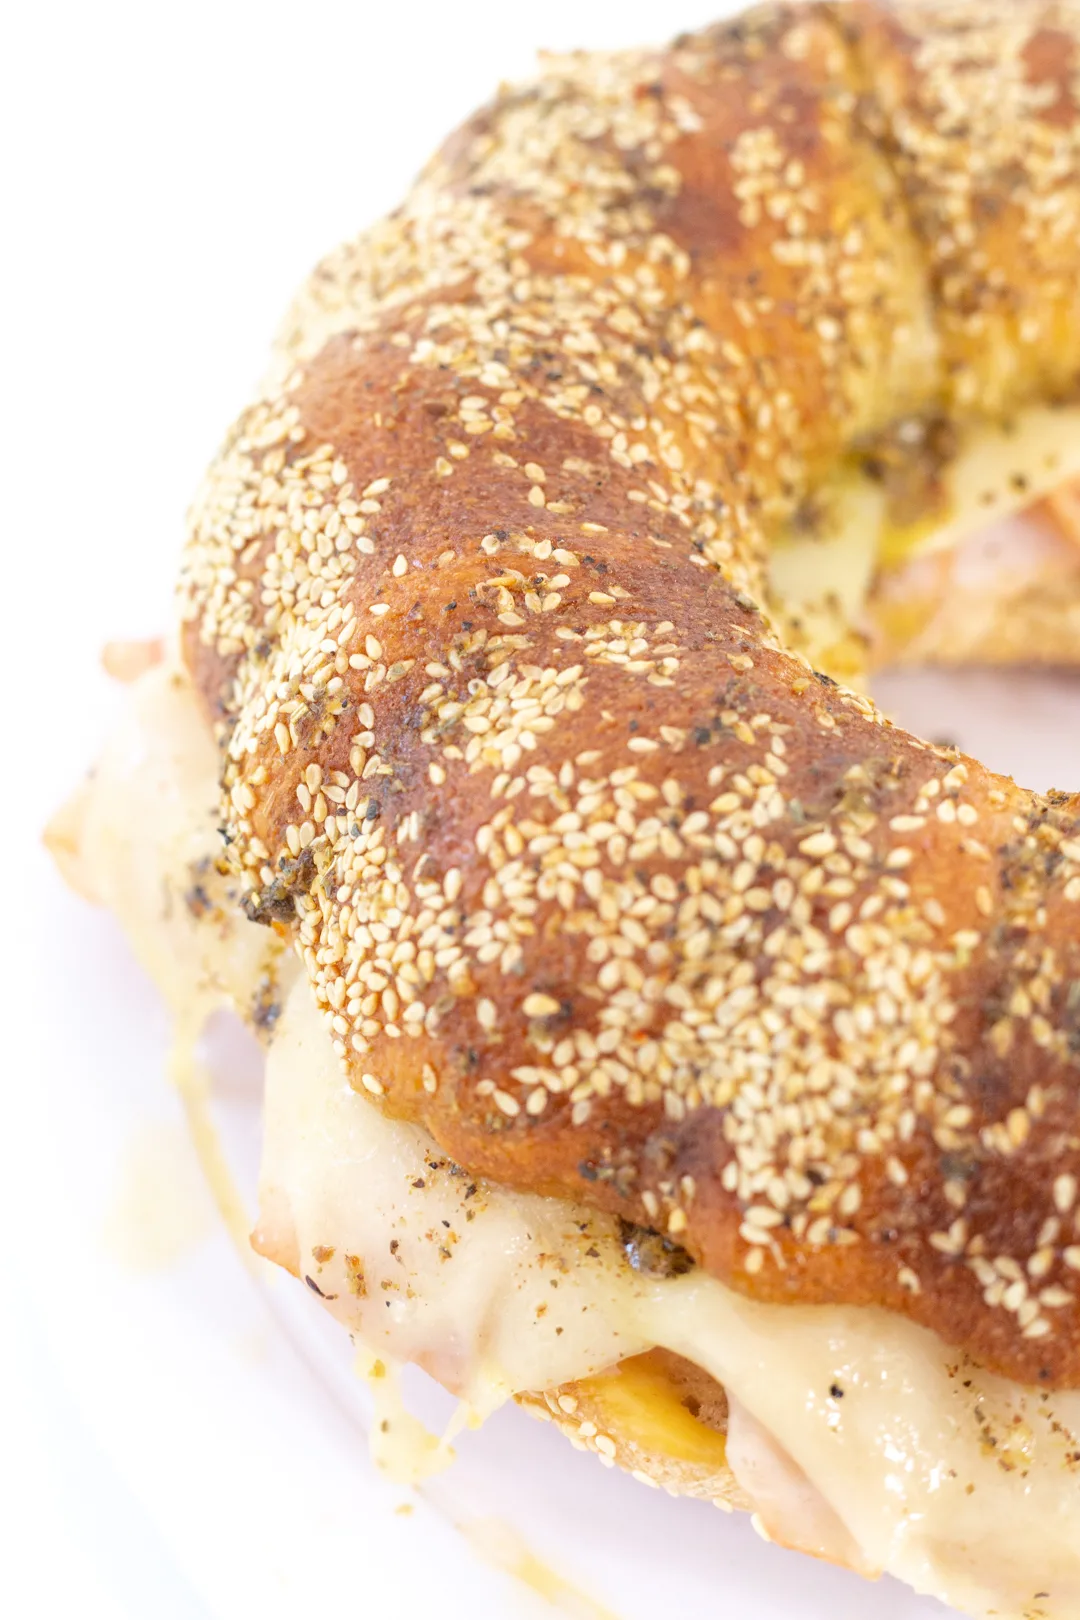 giant party sandwich up close with sesame seeds and italian seasonings